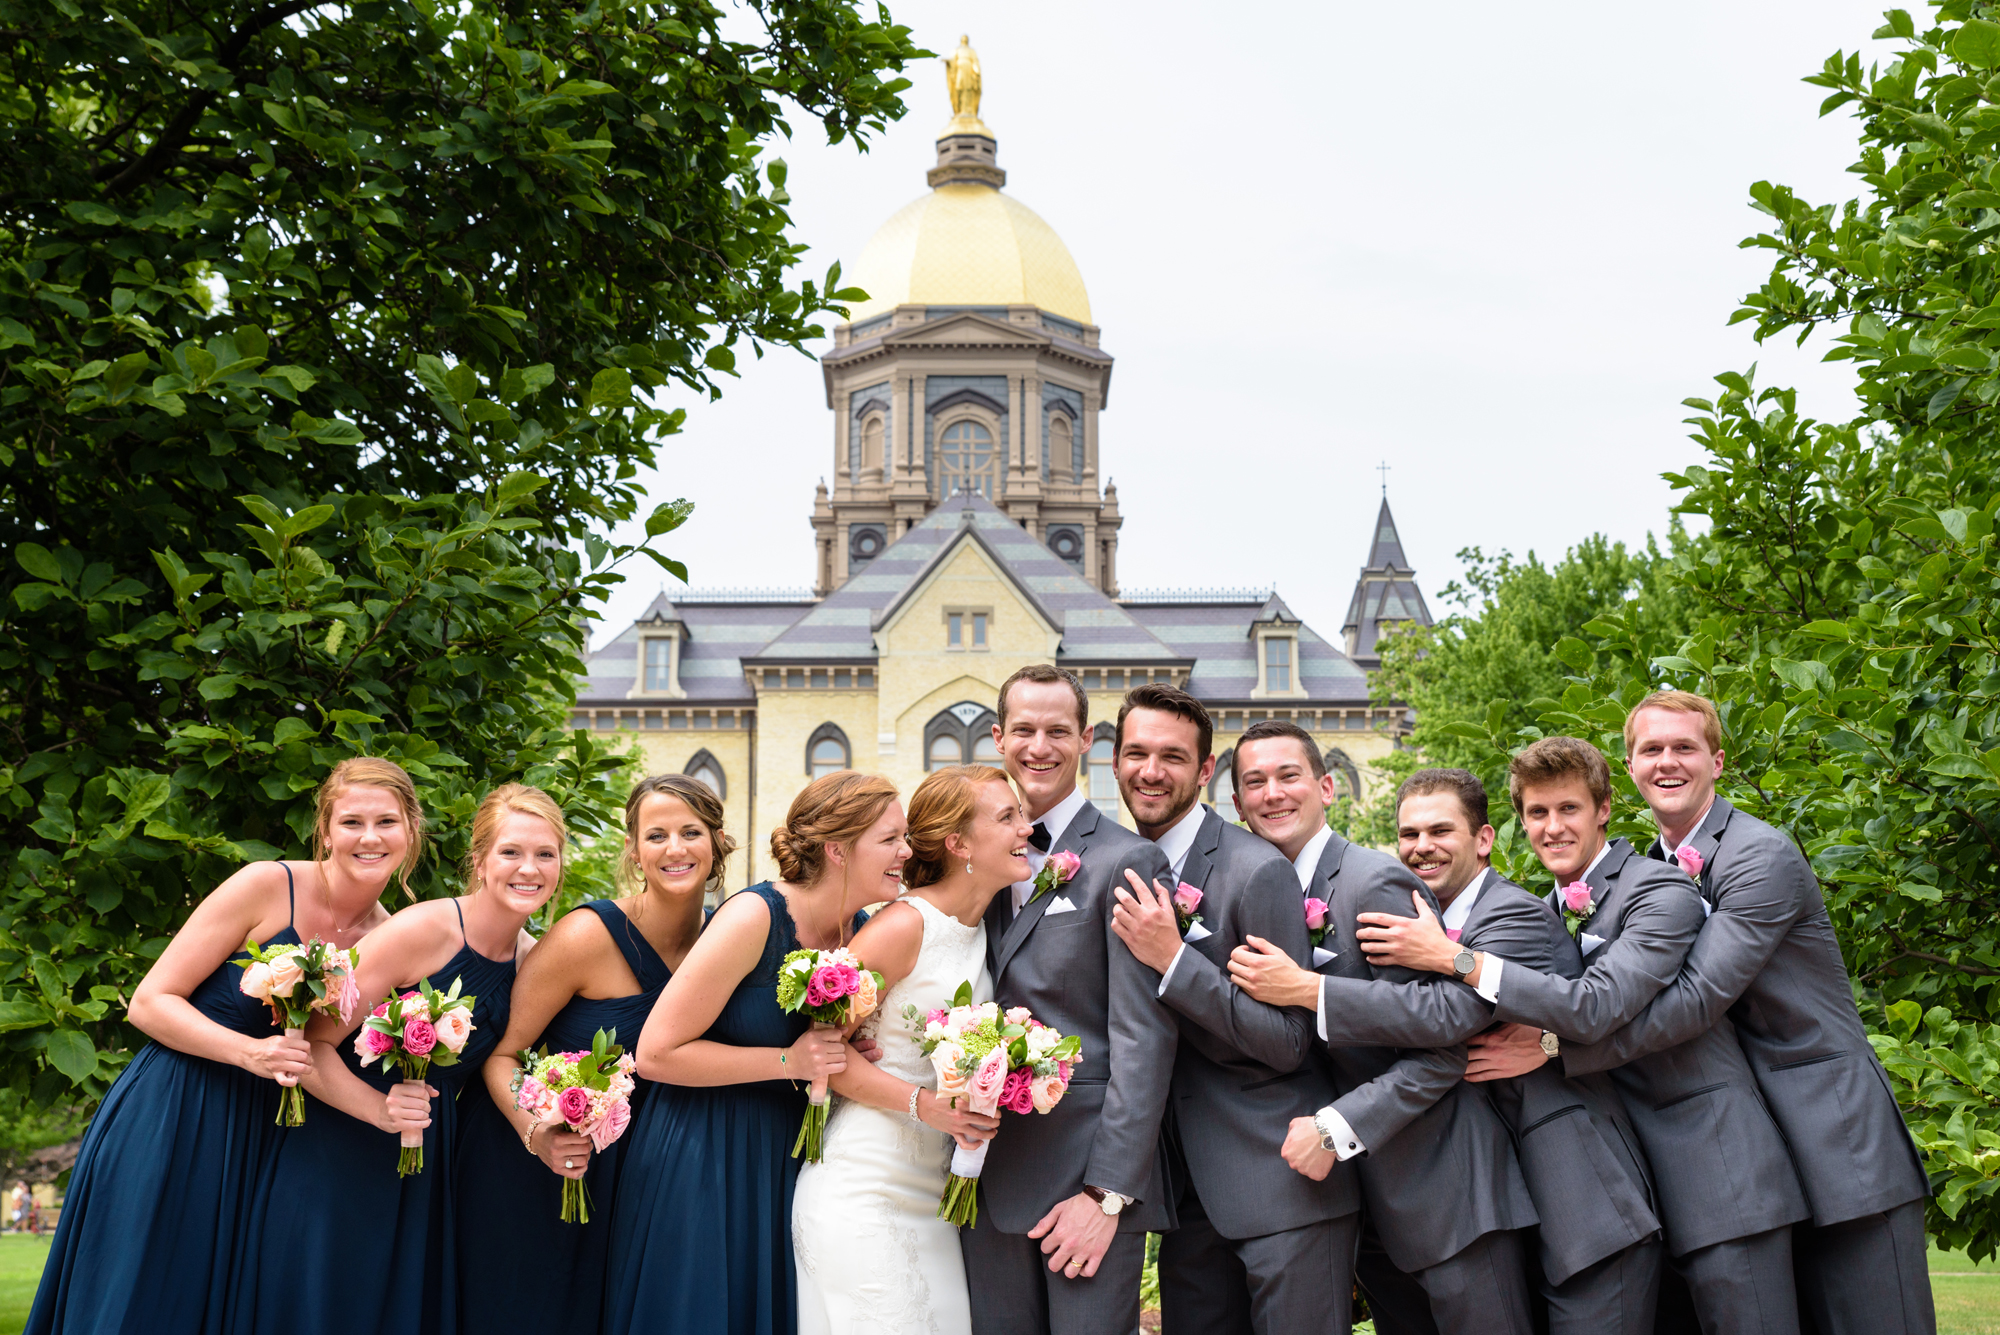 Bridal Party at the Golden Dome after a wedding ceremony at the Basilica of the Sacred Heart on the campus of the University of Notre Dame